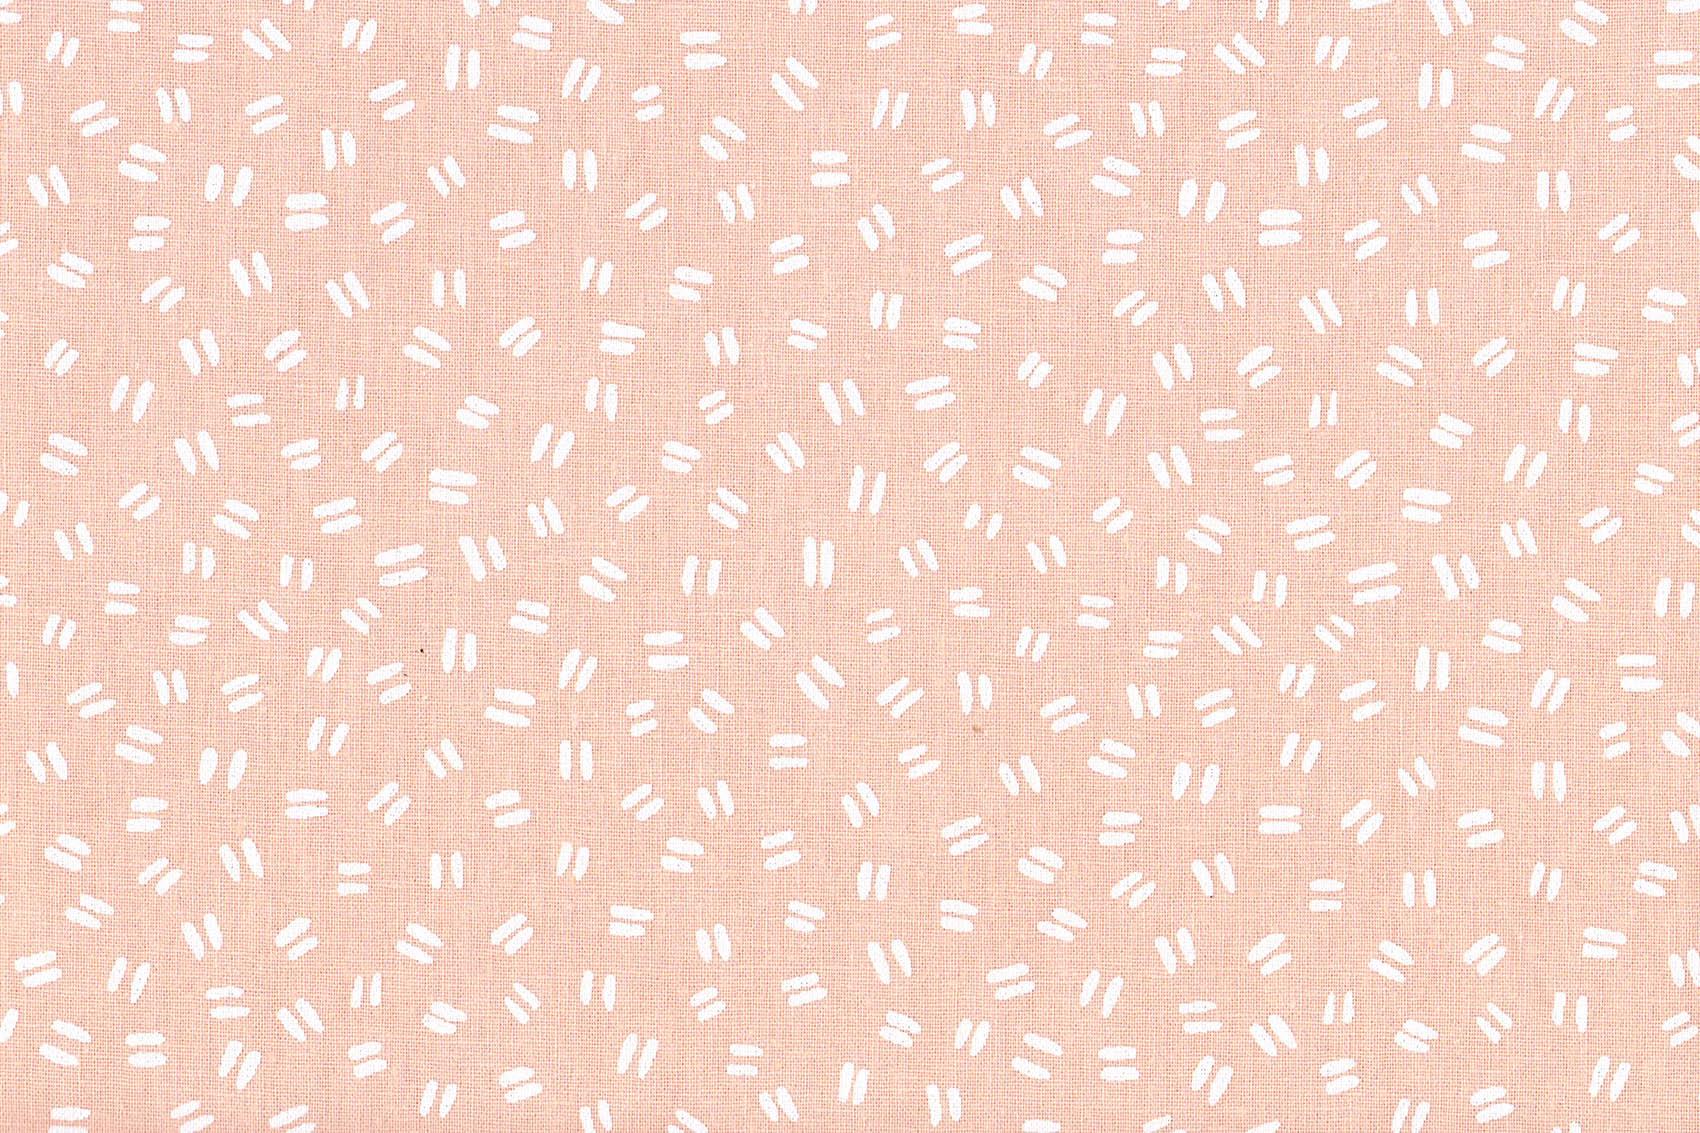 Desktop Wallpaper Downloads from Cotton & Flax: Day One